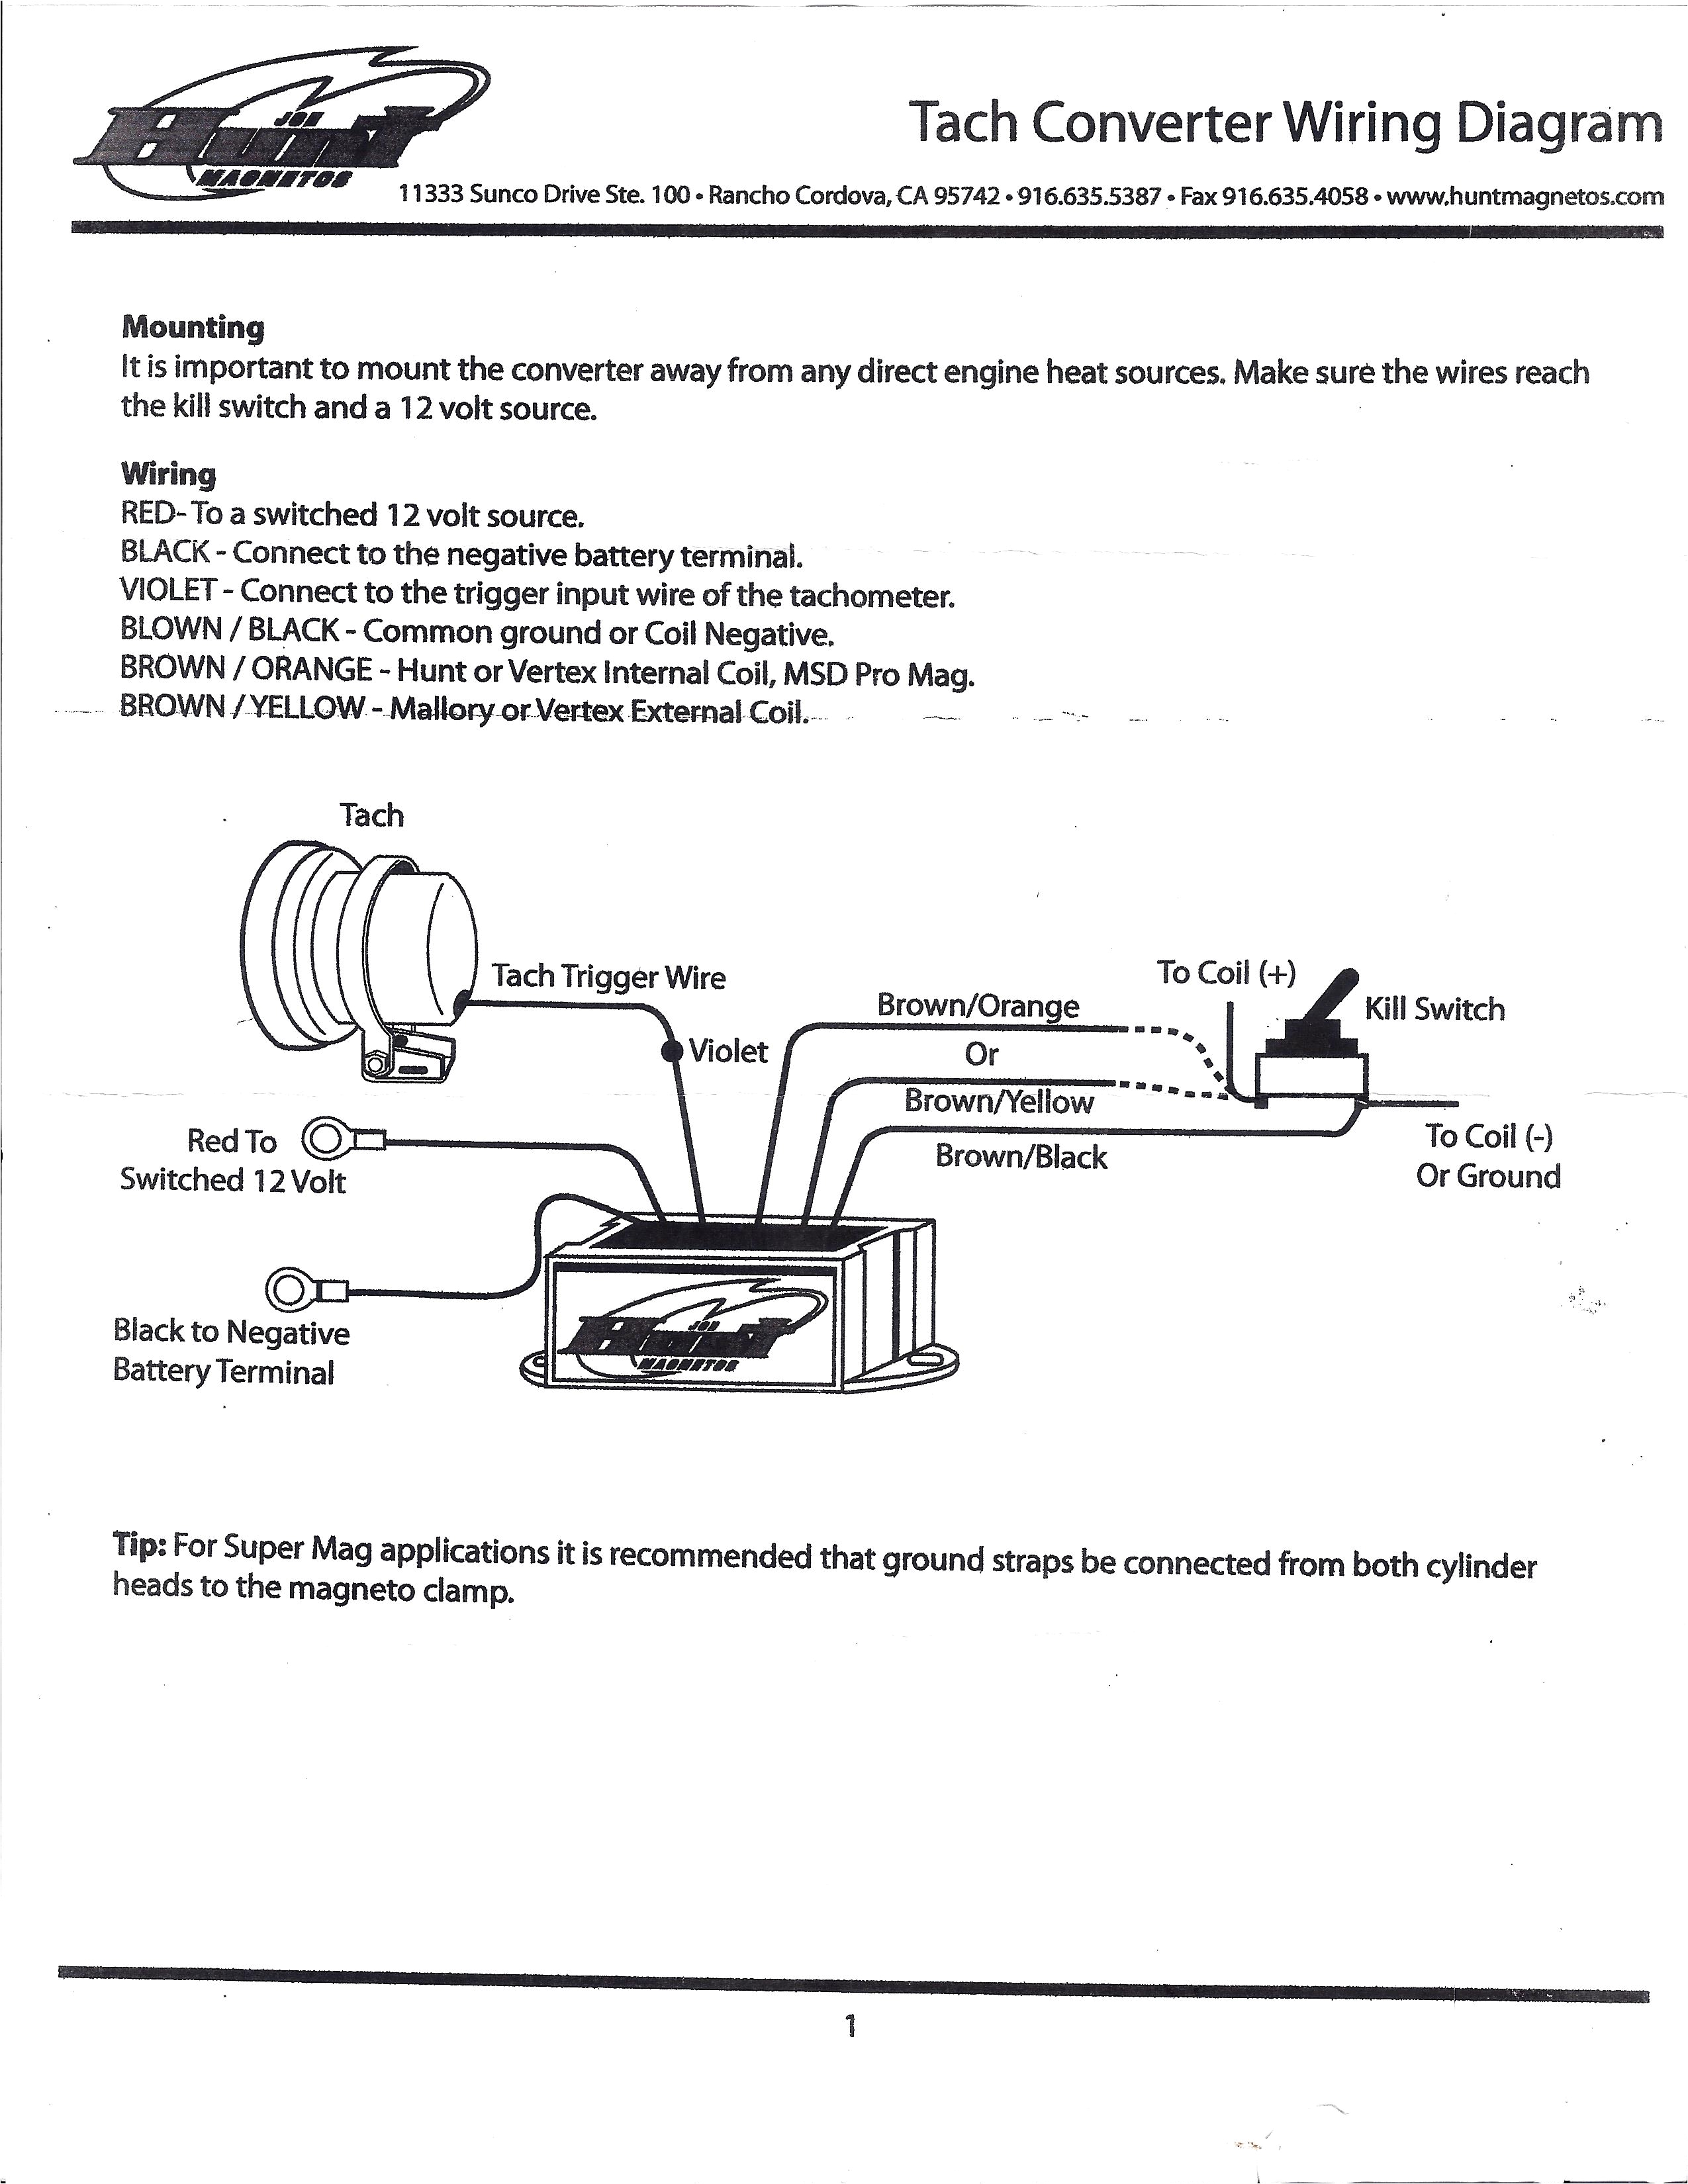 wiring diagram for installing a signal converter in order to make a tachometer work with a magneto